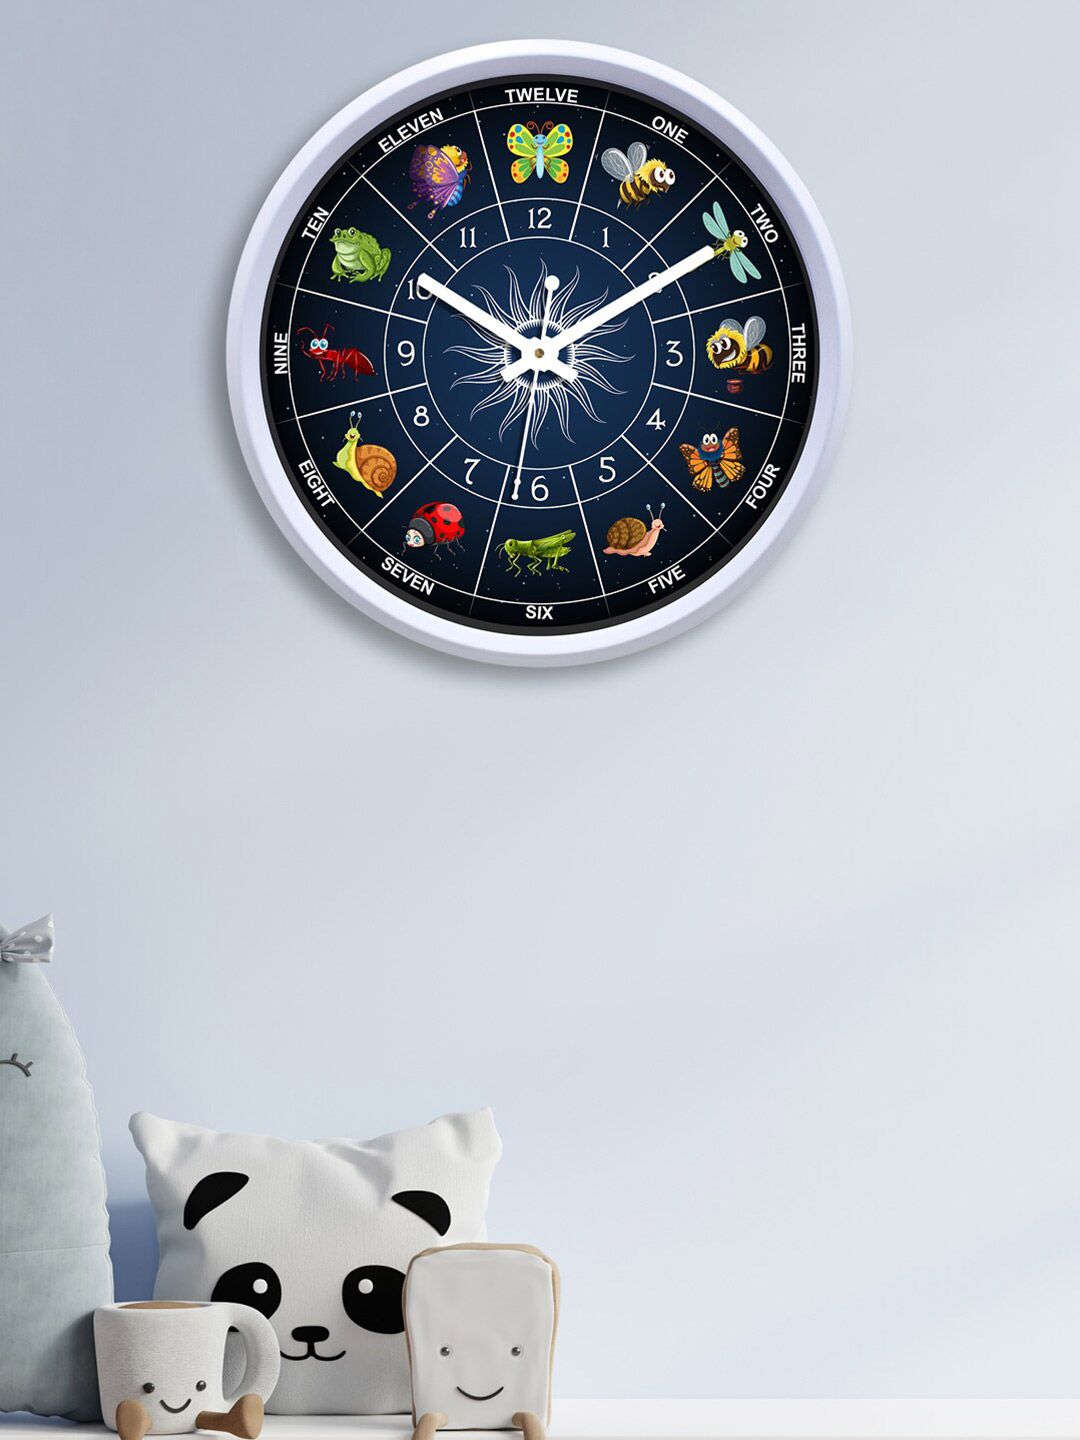 RANDOM Navy Blue & White Printed Contemporary Wall Clock Price in India